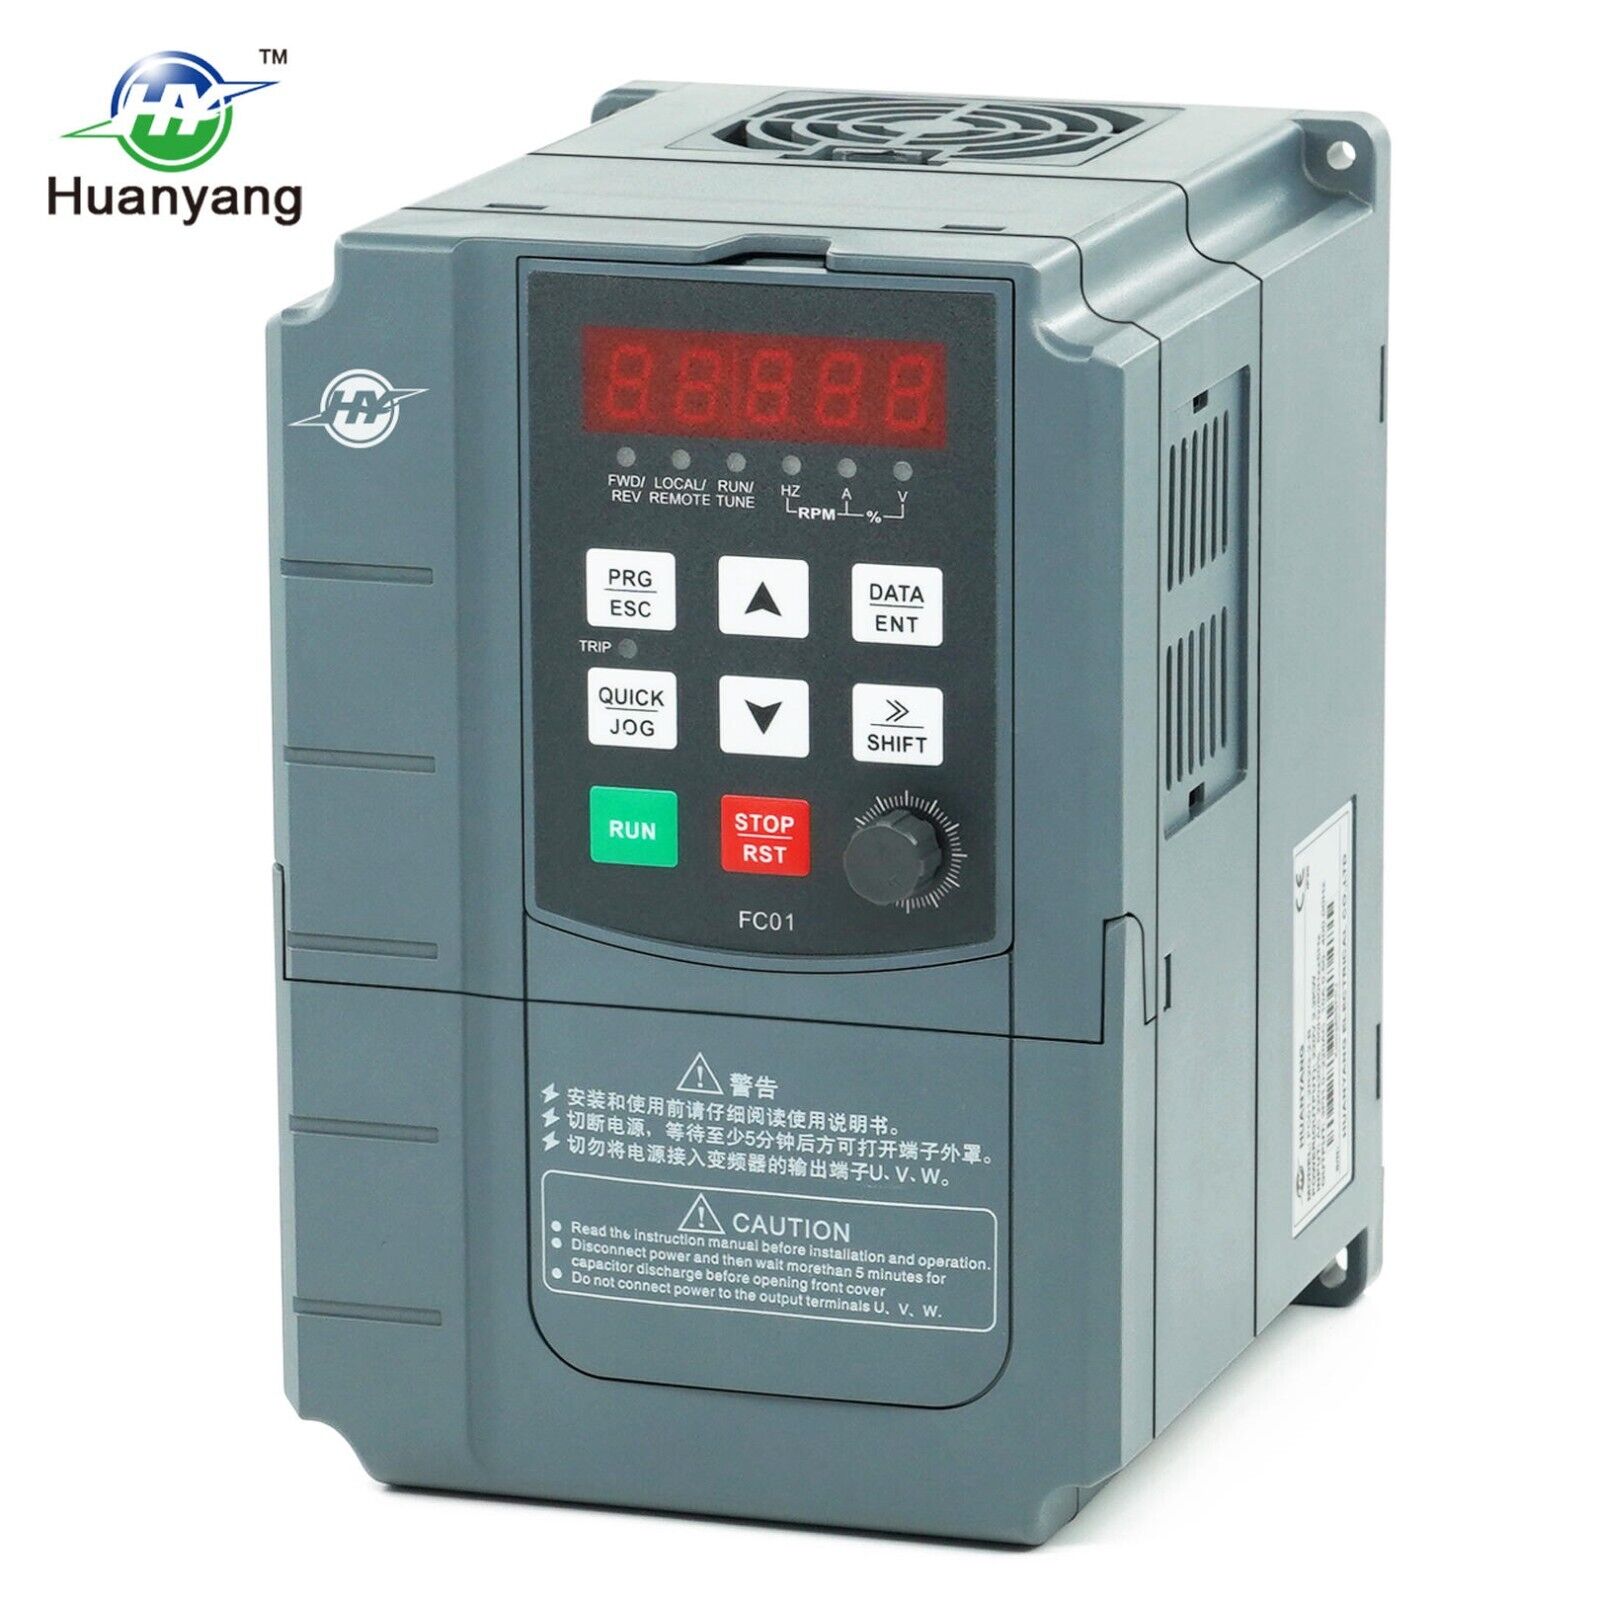 Huanyang VFD,Single to 3 Phase,Variable Frequency Drive,0.7KW 1HP 220V Inverter